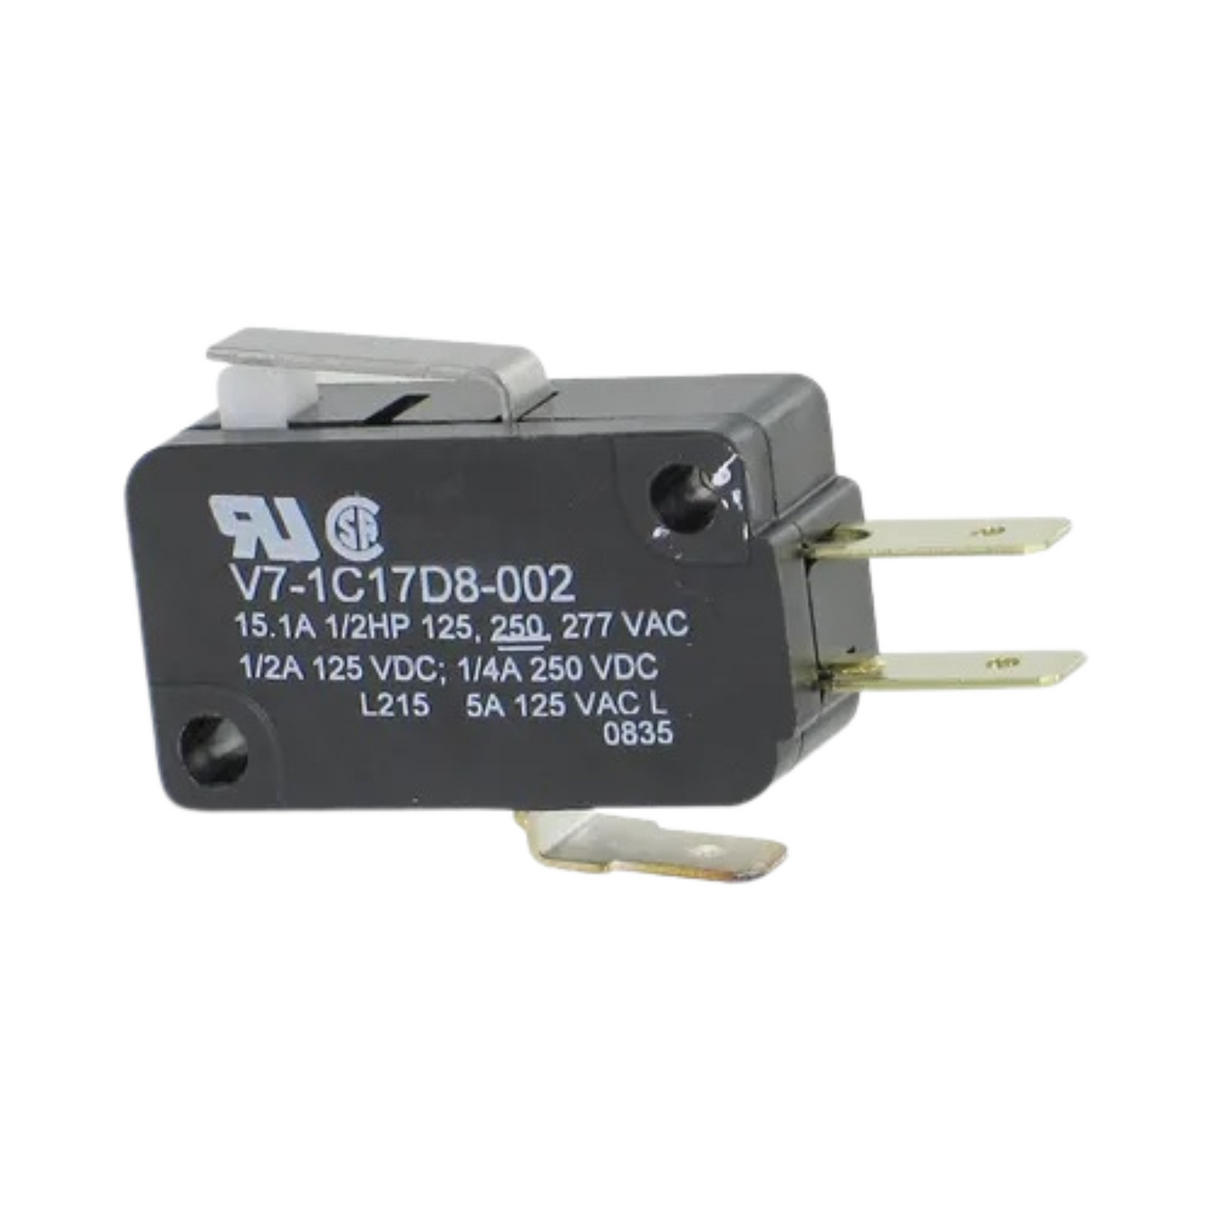 Honeywell V7-1C17D8-002 Micro Switch, Miniature Basic Switches, V7 Series, Single Pole Double Throw (SPDT), 5A@125VAC, 160g Maximum Operating Force